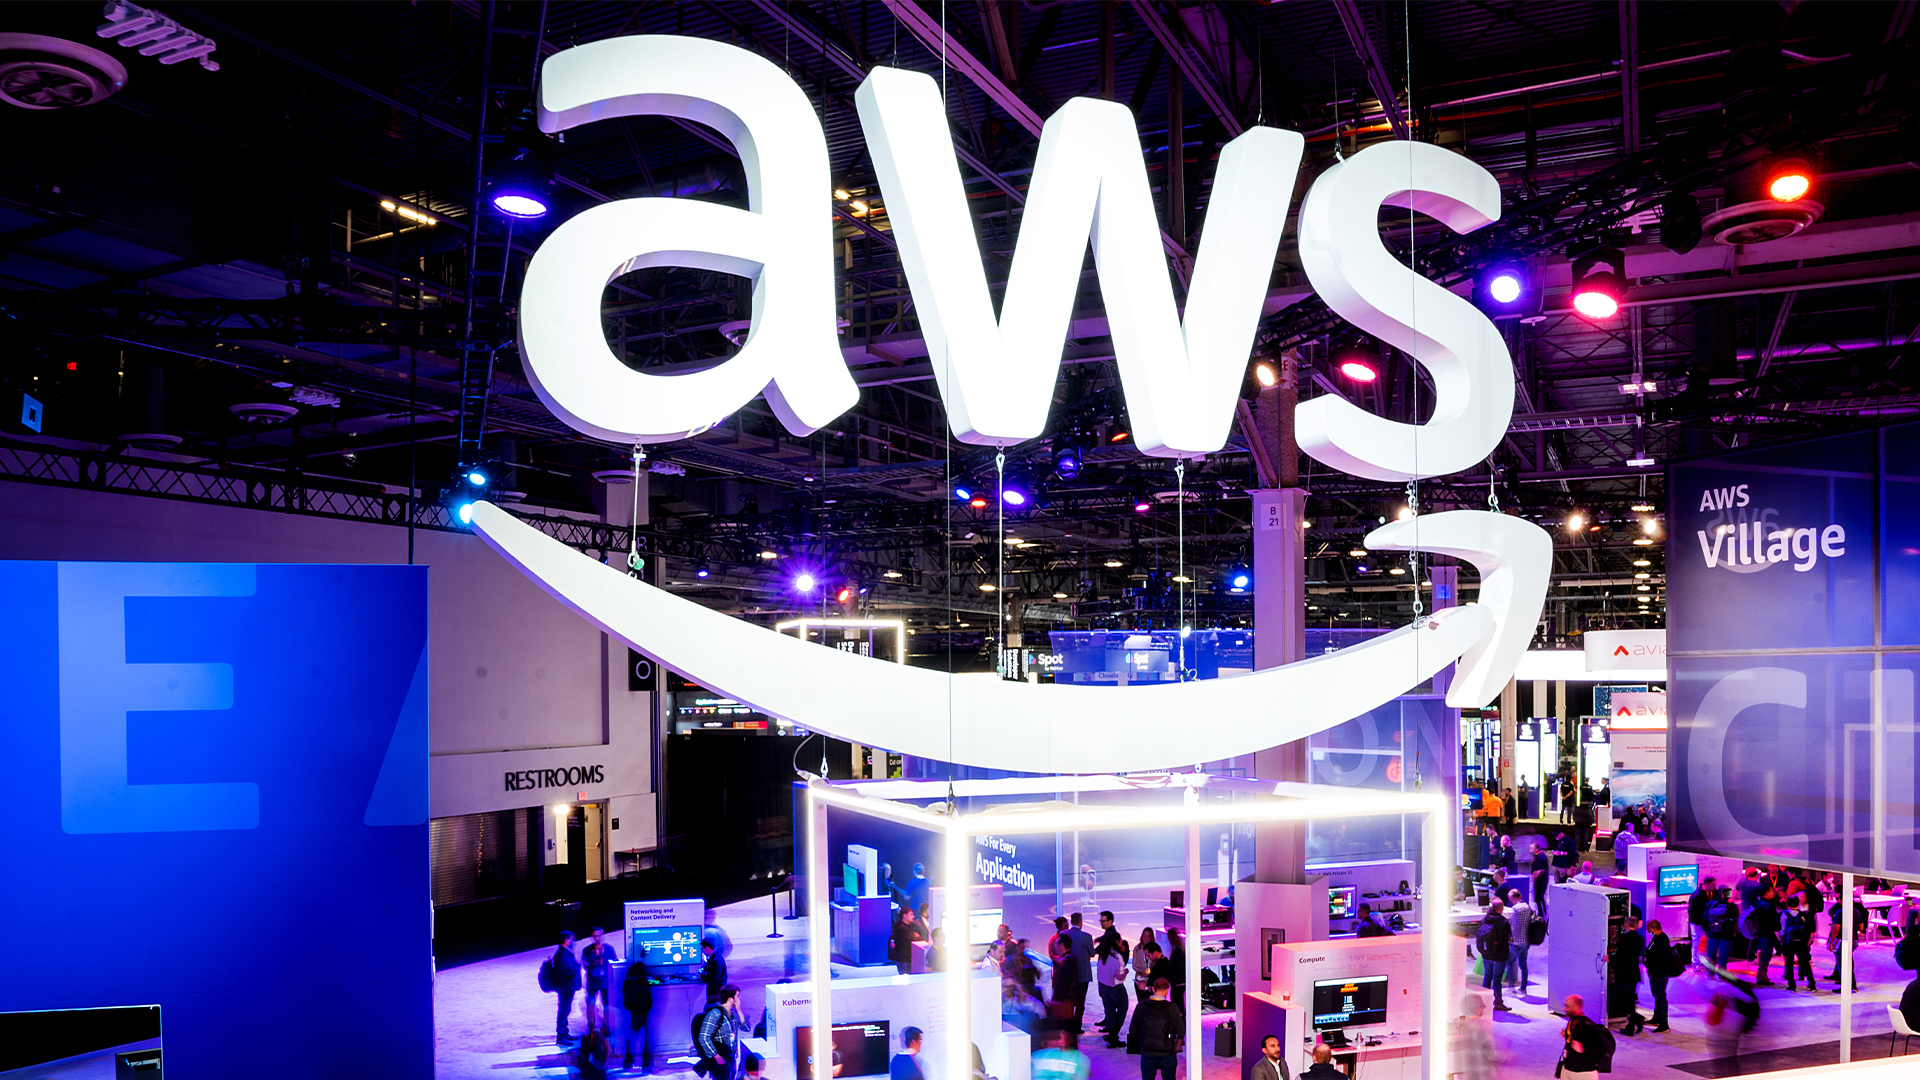 AWS fined $525 million after US court rules Amazon S3 storage and DynamoDB services infringe patents